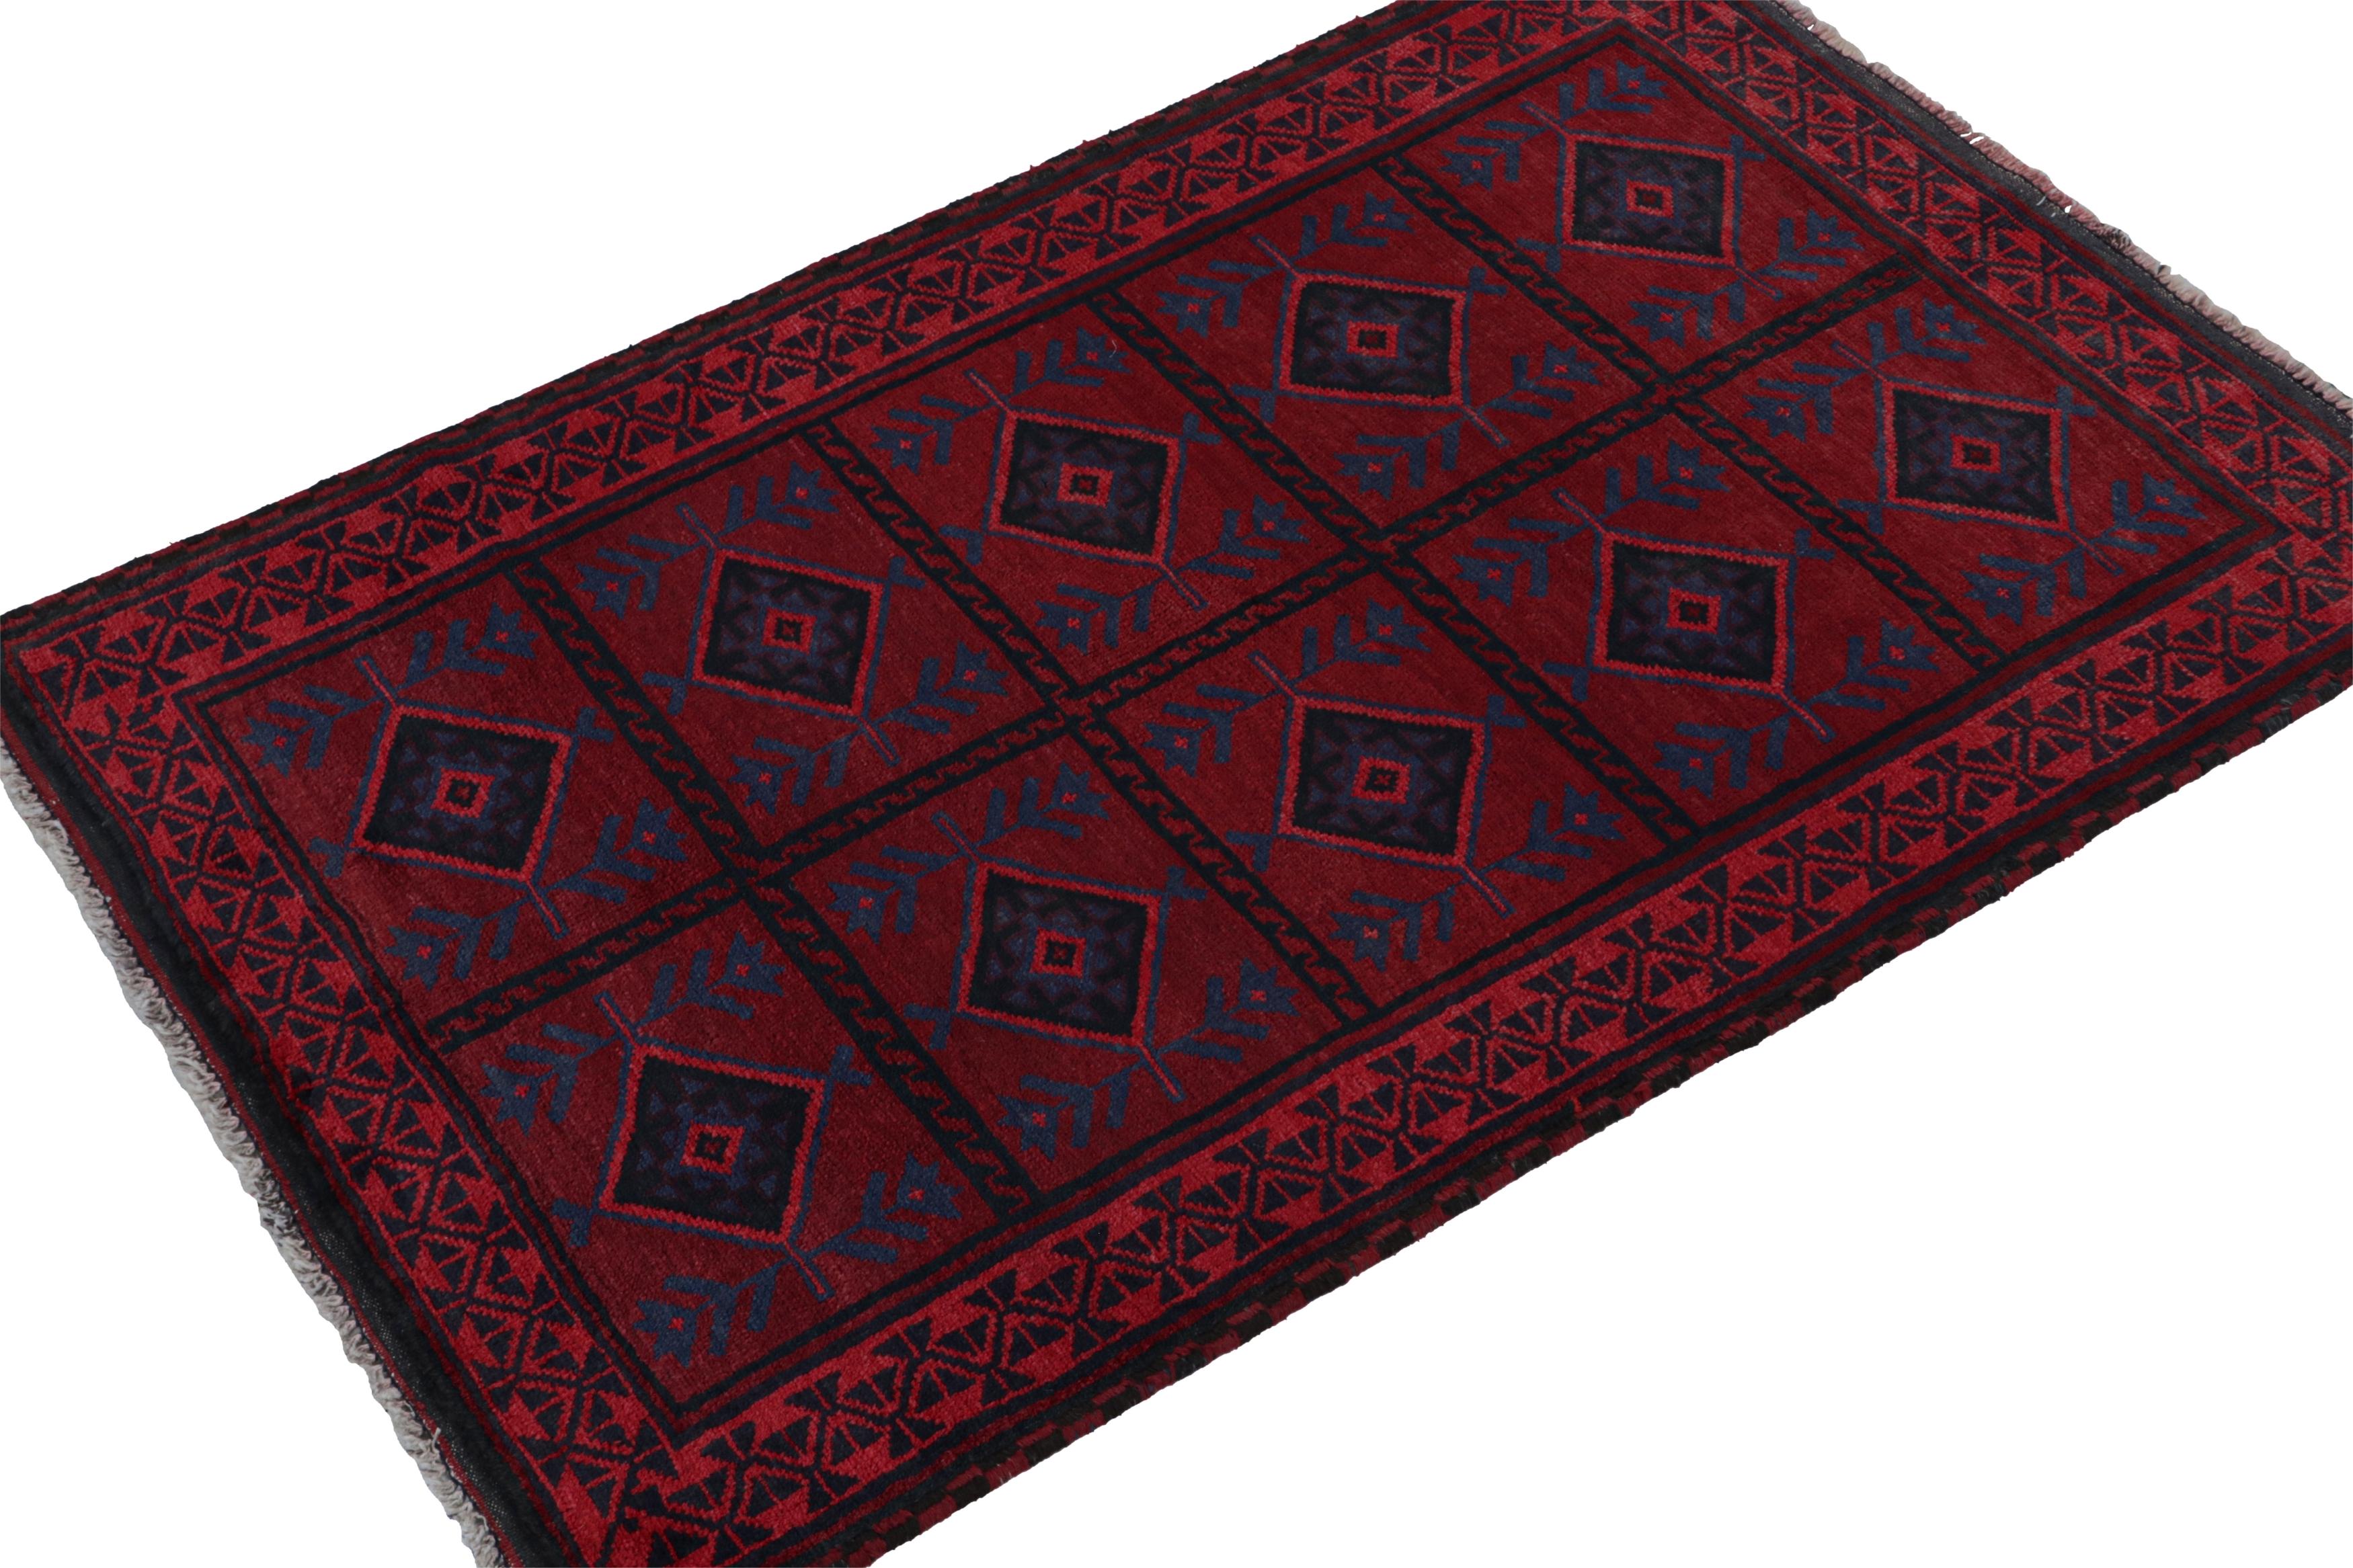 Hand-knotted in wool, this 4x6 Baluch Persian rug of the 1950s is the latest to enter Rug & Kilim’s Antique & Vintage collection.

On the Design:

The piece carries tribal patterns in red & blue colorways. Connoisseurs will note the employment of